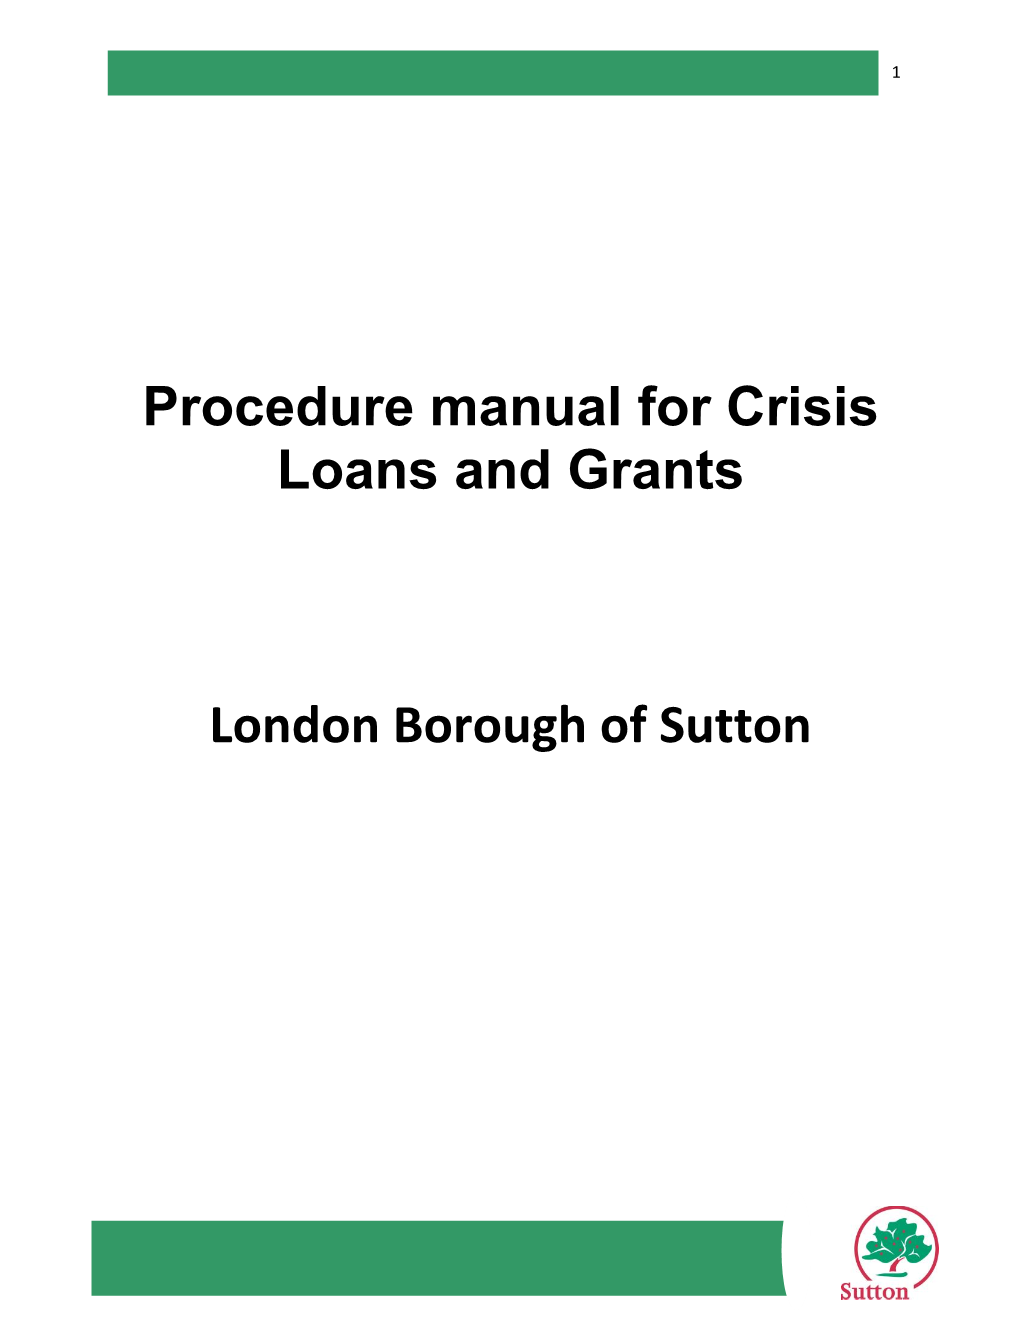 Procedure Manual for Crisis Loans and Grants London Borough of Sutton